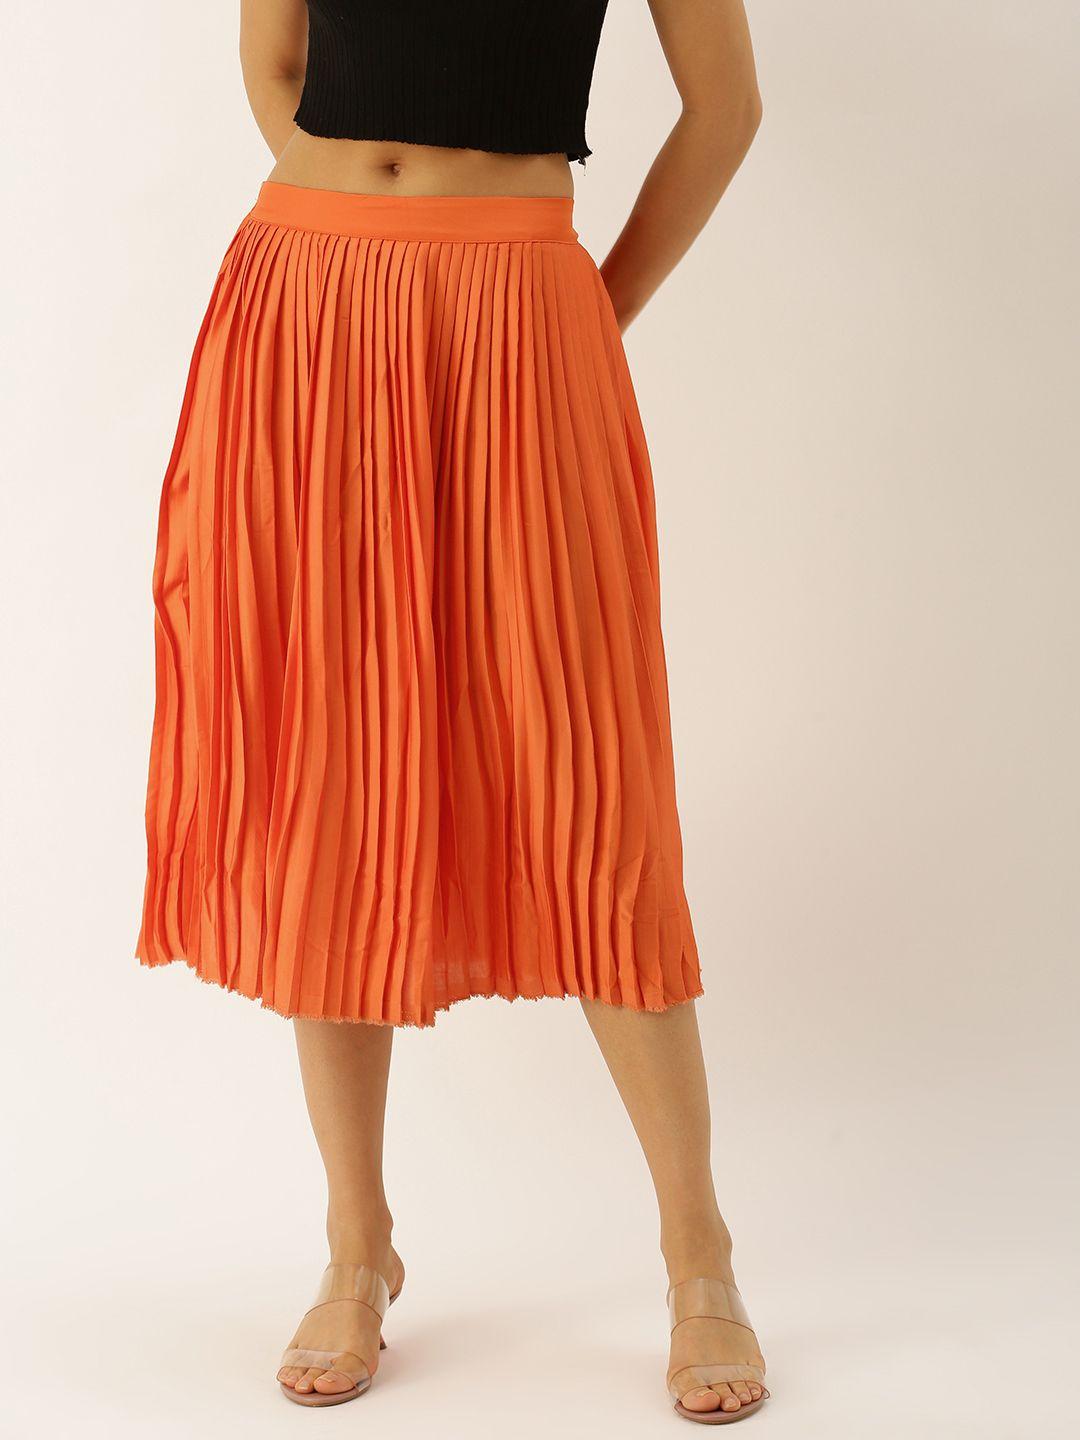 antheaa women orange solid accordion pleated a-line skirt